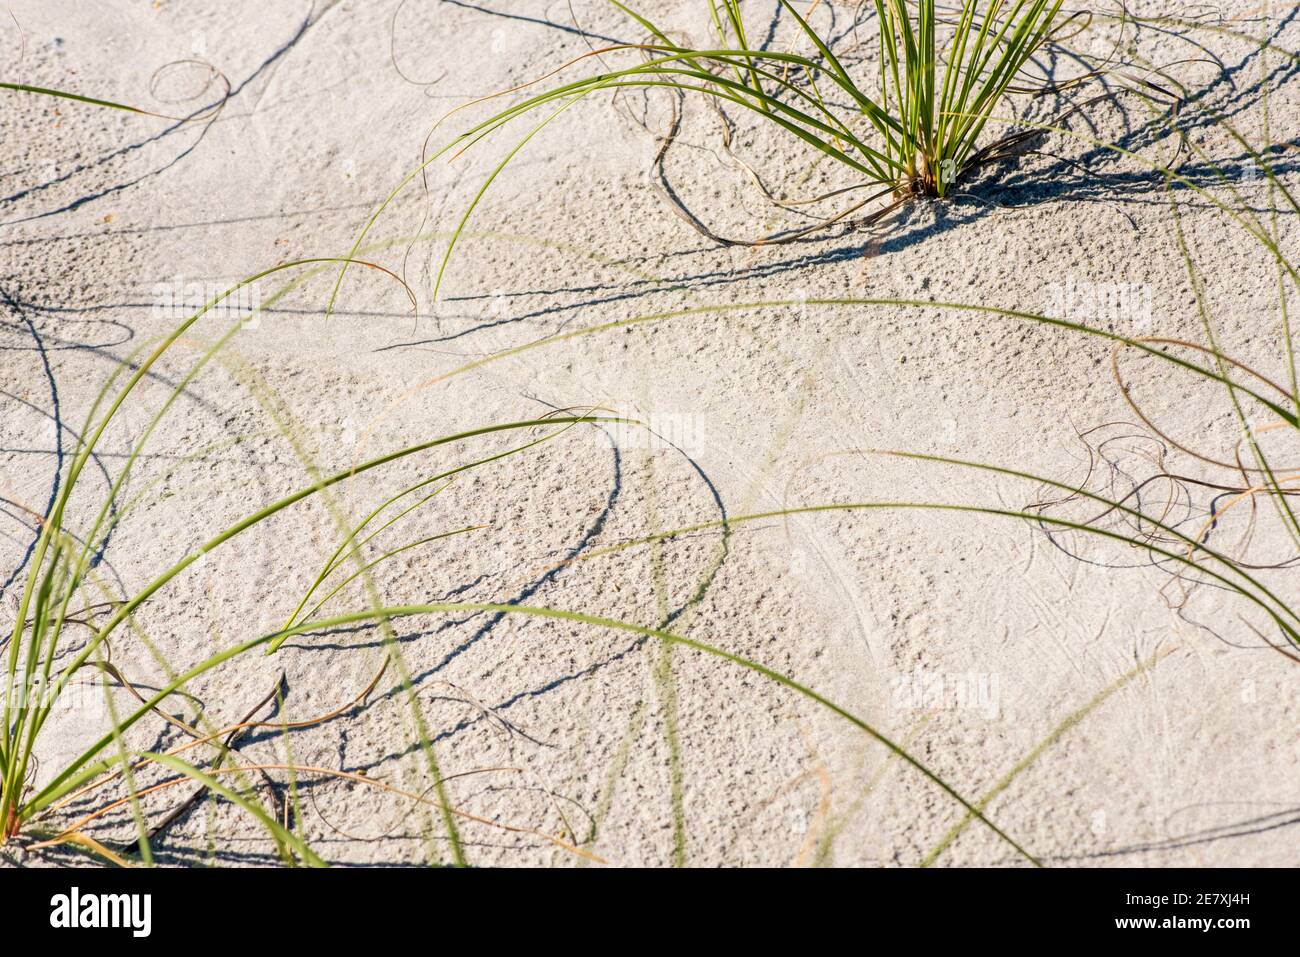 Sea grass is strategically planted into sand dunes to help prevent beach erosion. Stock Photo